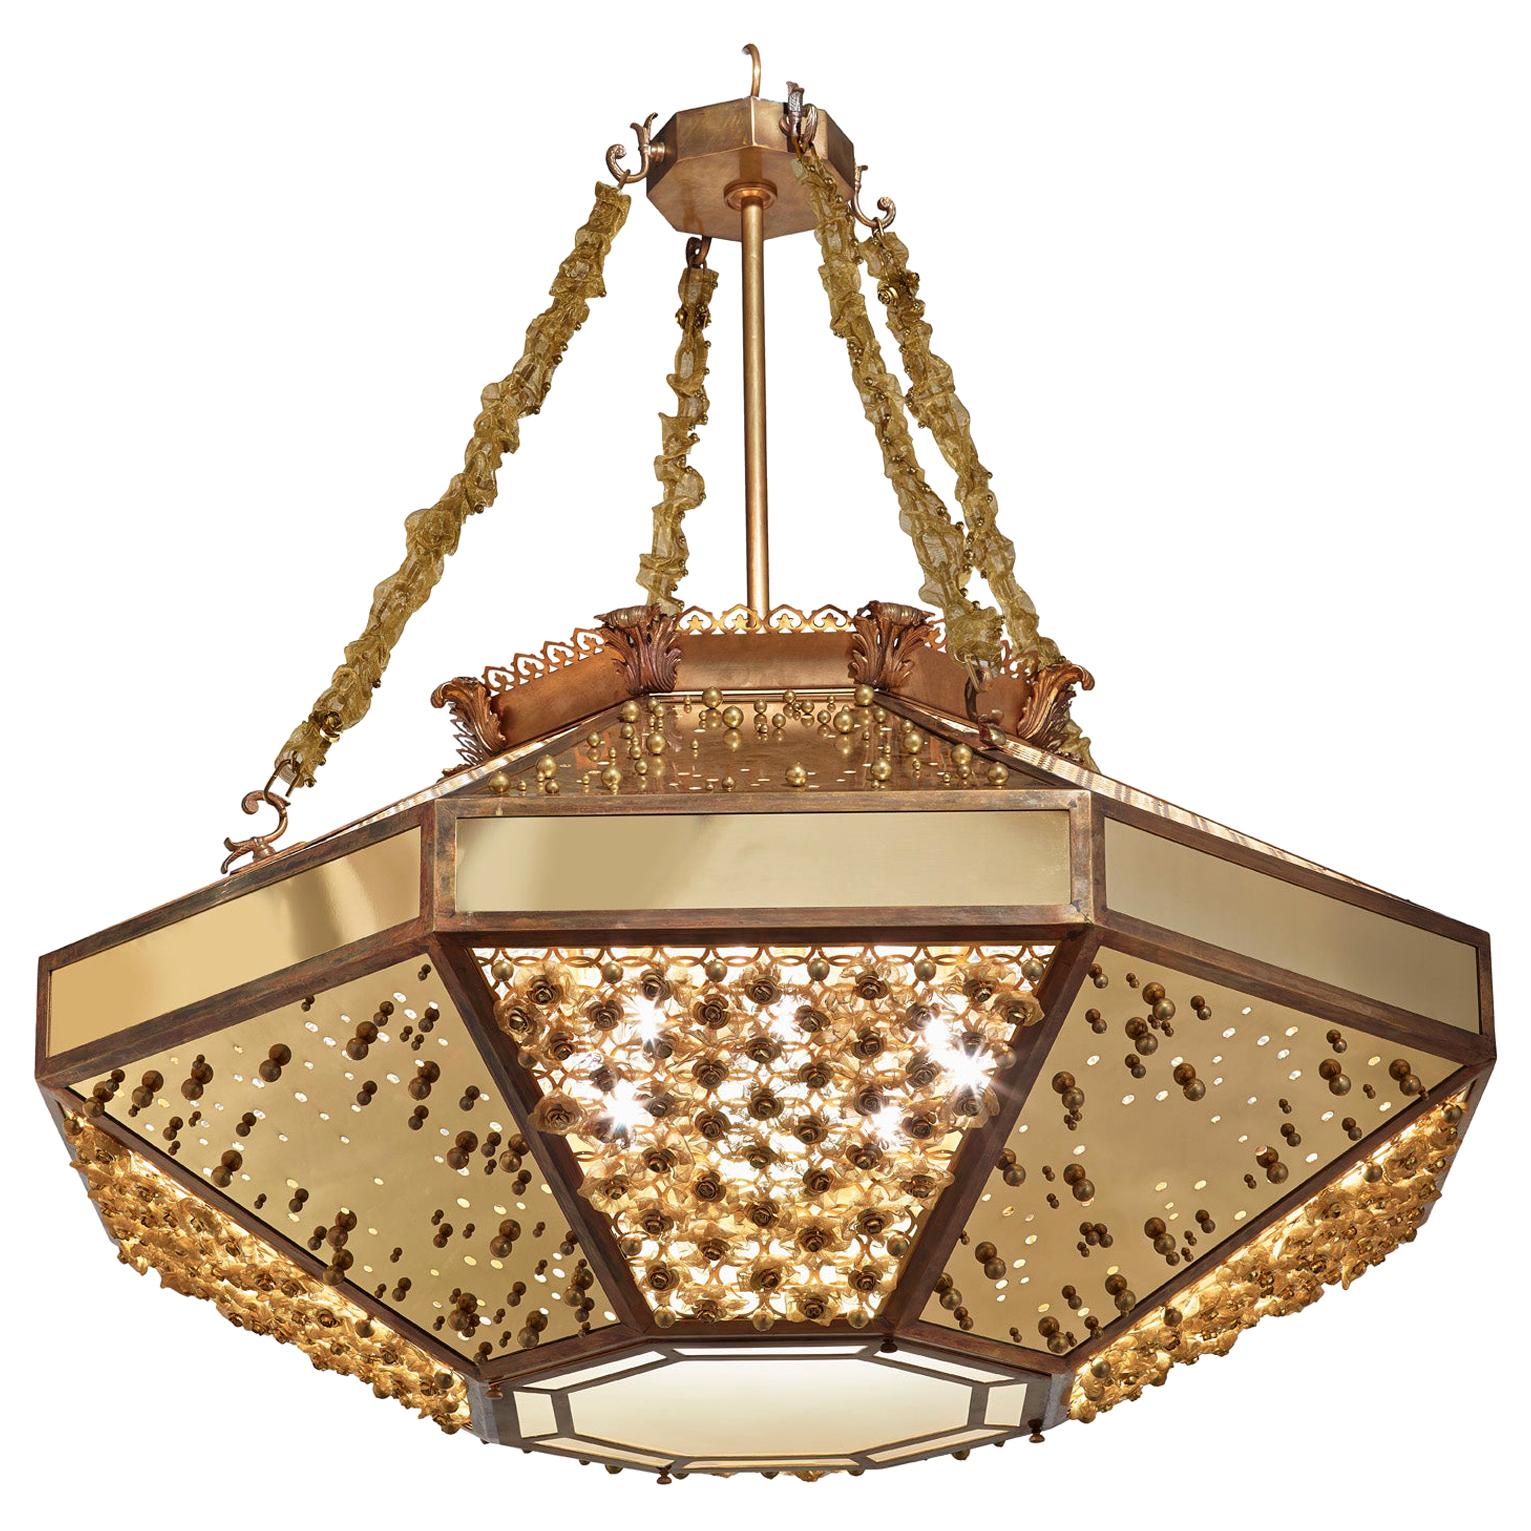 Stylish Chandelier with Frame Metal Mesh and Decorative Insert in Brass